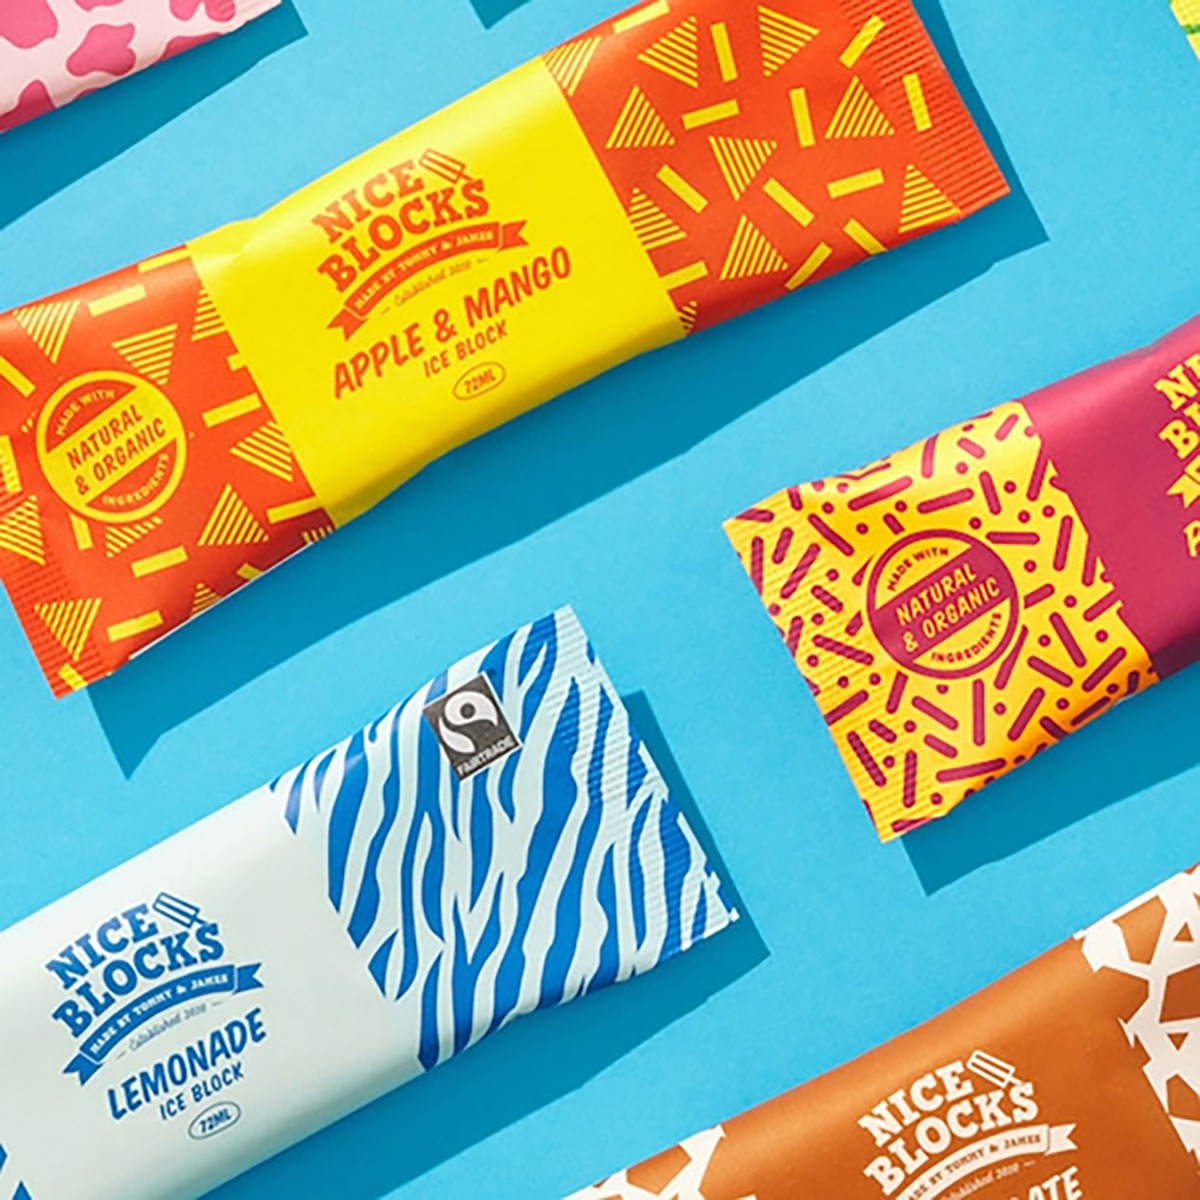 Top Packaging Trends for 2020